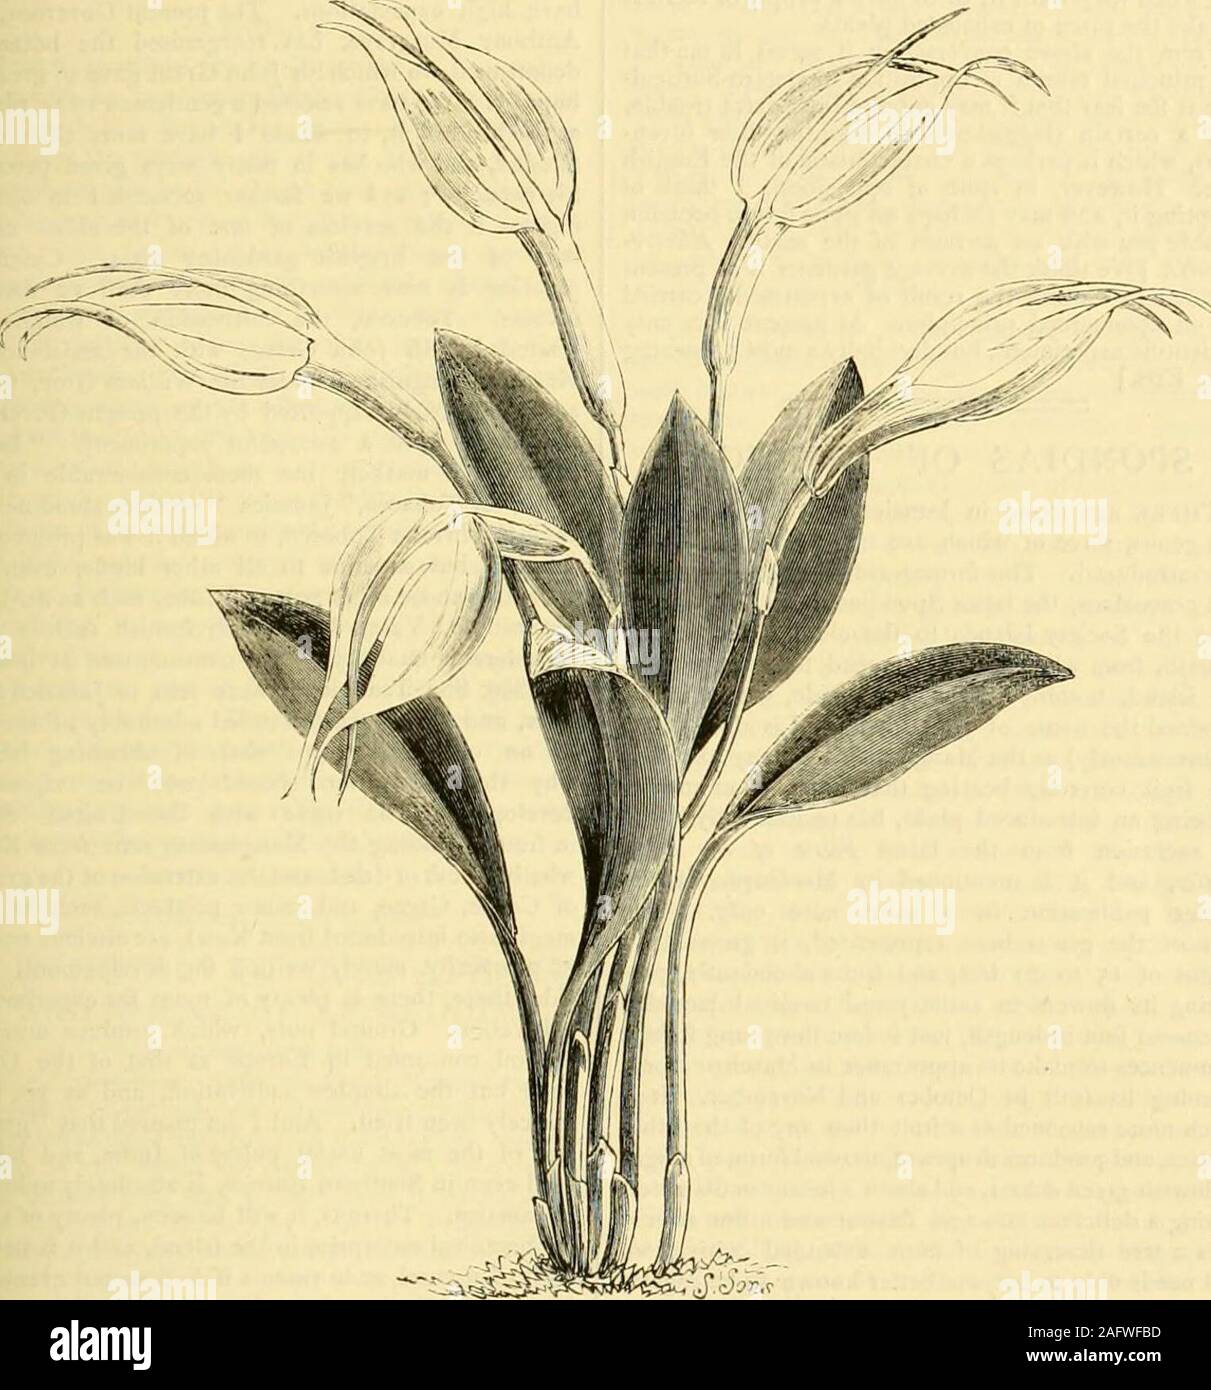 . The Gardeners' chronicle : a weekly illustrated journal of horticulture and allied subjects. he very base ofeven sepals, which are a little narrower than the oddone. Small petals whitish. Lip yellowish, with a darkknob at the apex. It has been believed in Englandto be Masdevallia Wageneriana, Lindl. No doubtthere is a certain similarity between the two, but thissuggestion is founded on a mistake. That species is MASDEVALLIA ROSEA. Our illustrations, tigs. 117, 118, taken from a sketchby M. Lehmann, represent this lovely Masdevallia,which, though old in one sense, may yet be describedas new. Stock Photo